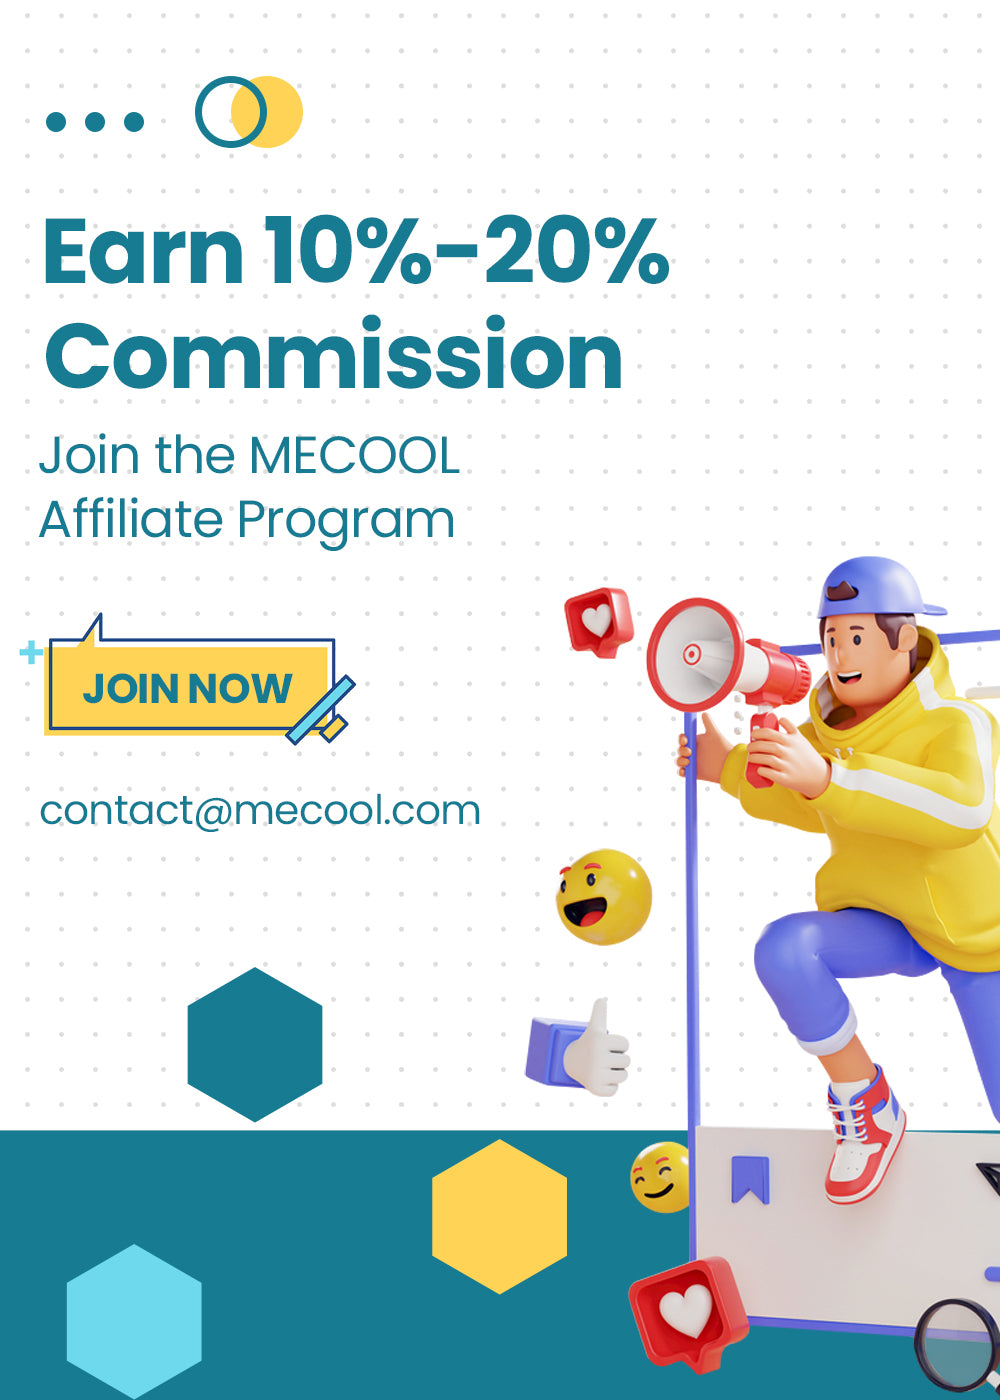 Join the MECOOL Affiliate Program